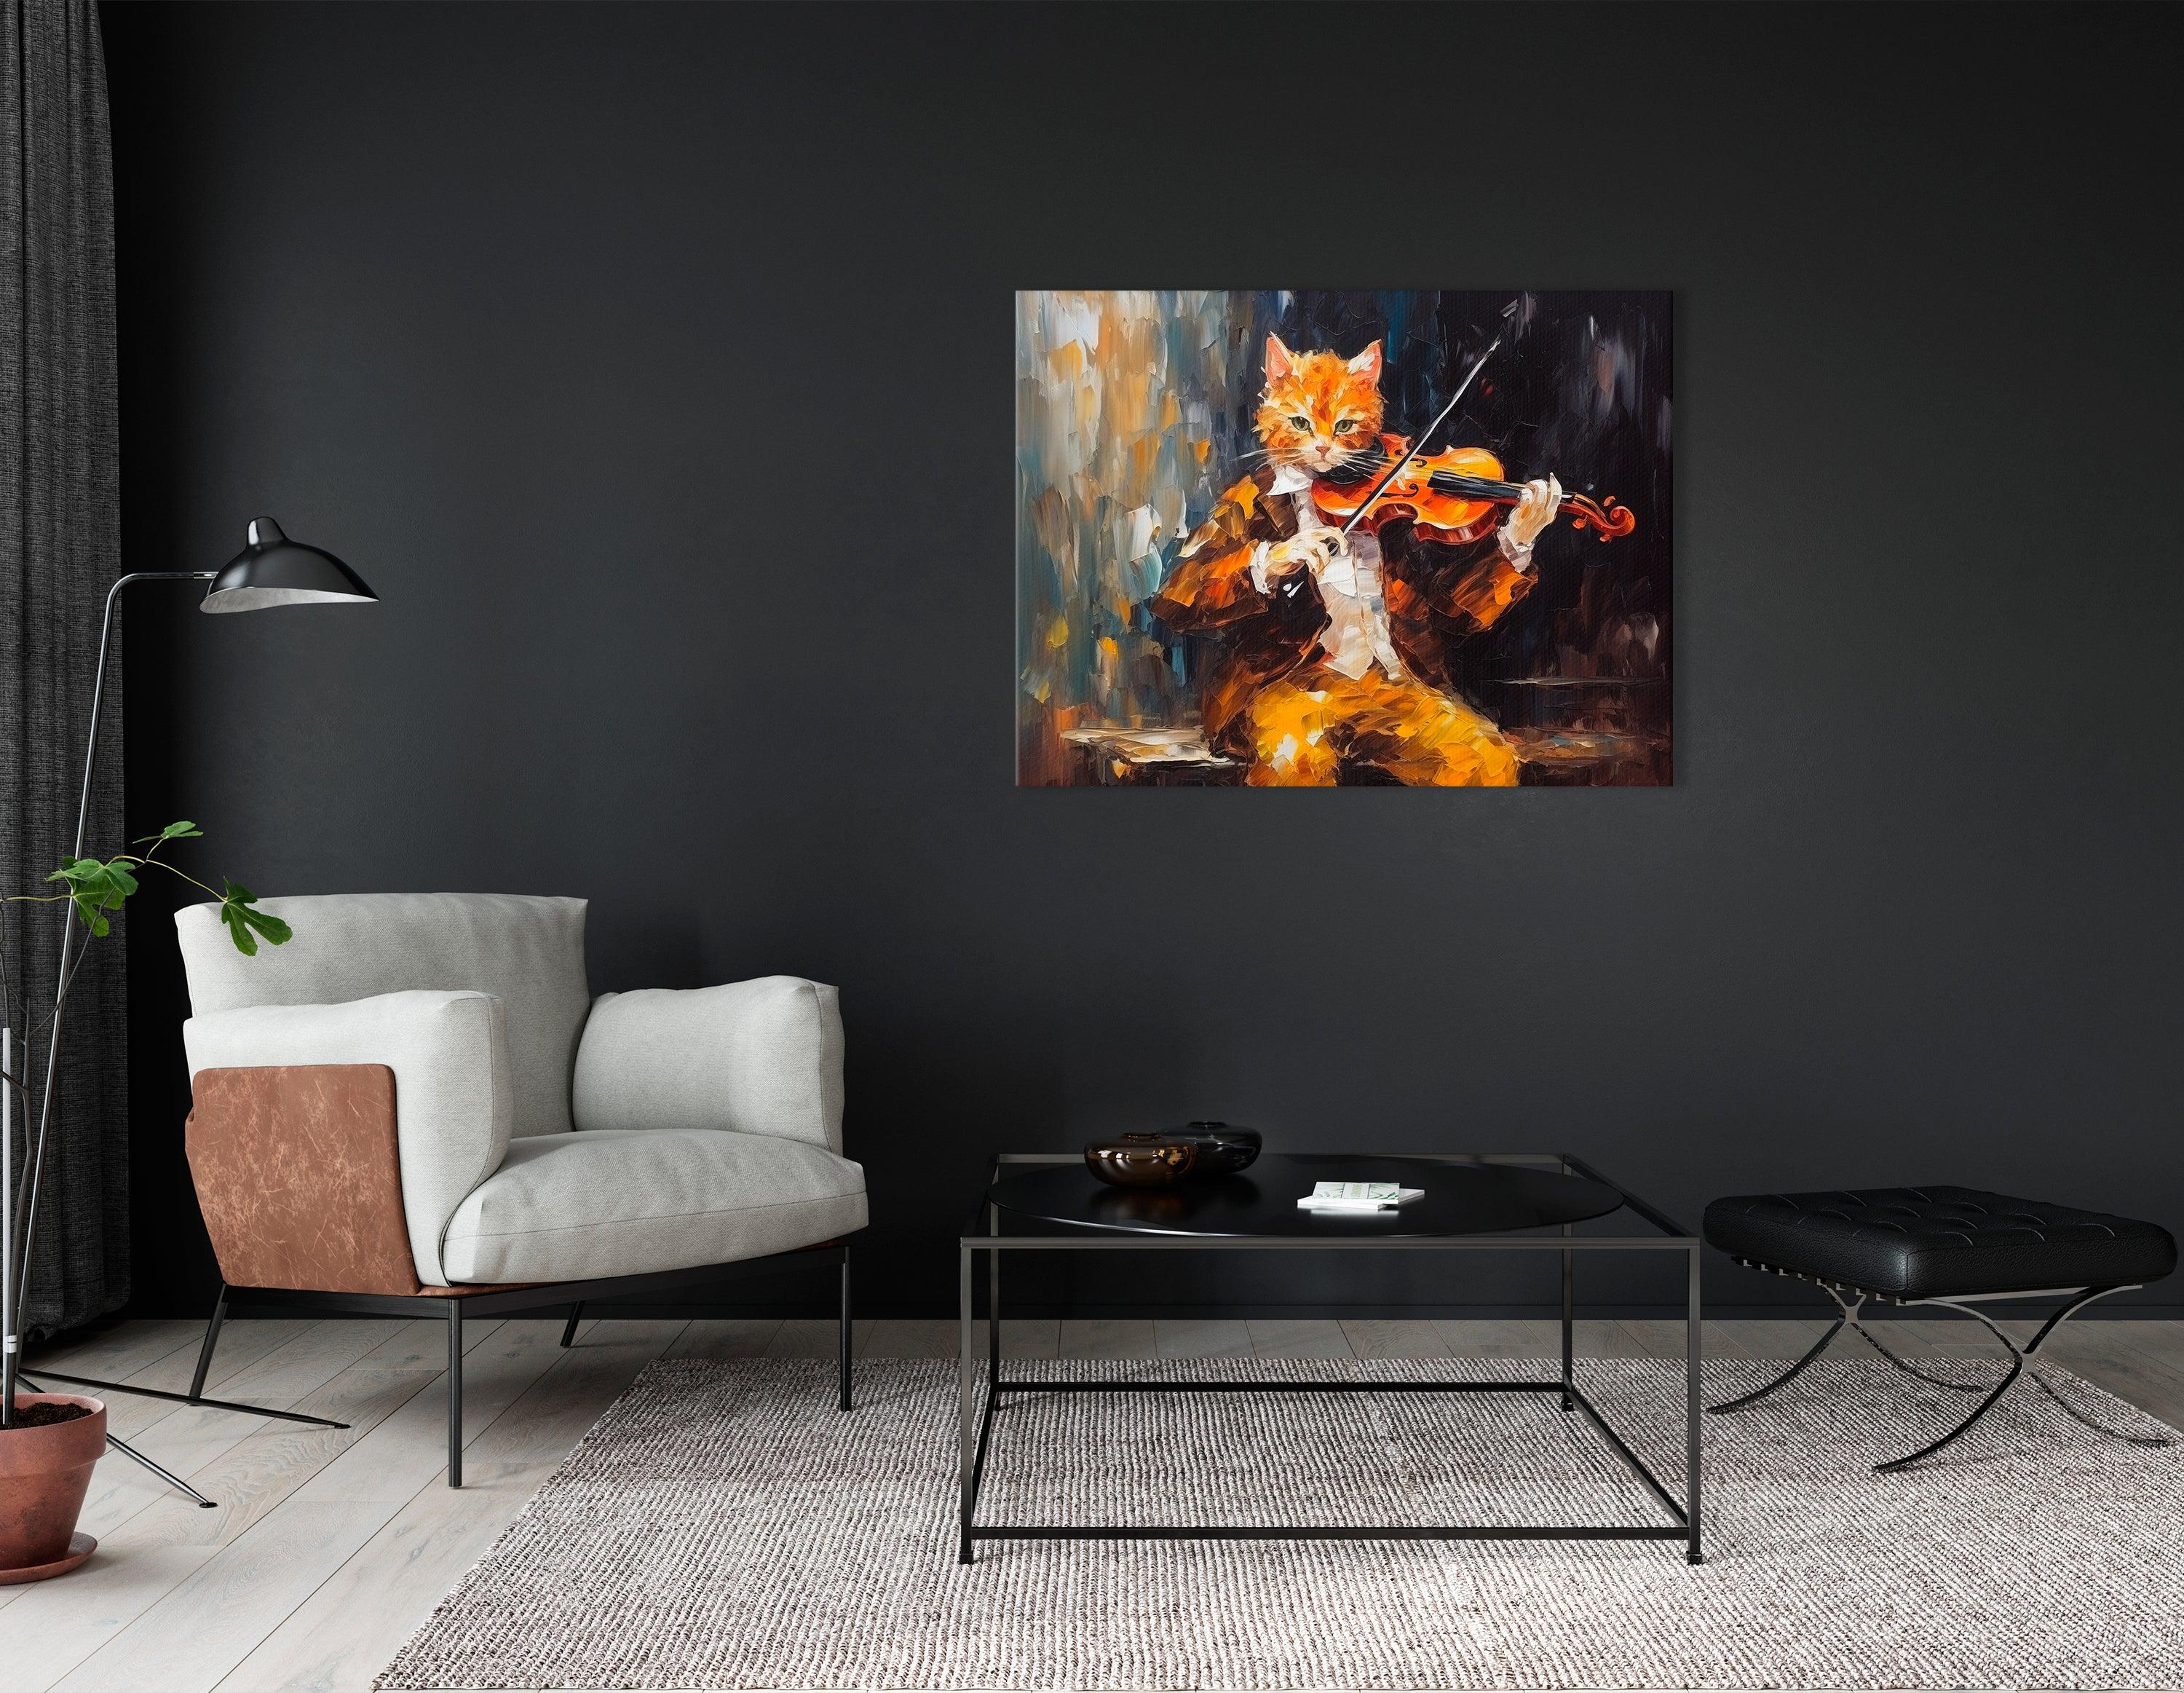 Ginger Cat in Suit Playing Violin - Canvas Print - Artoholica Ready to Hang Canvas Print